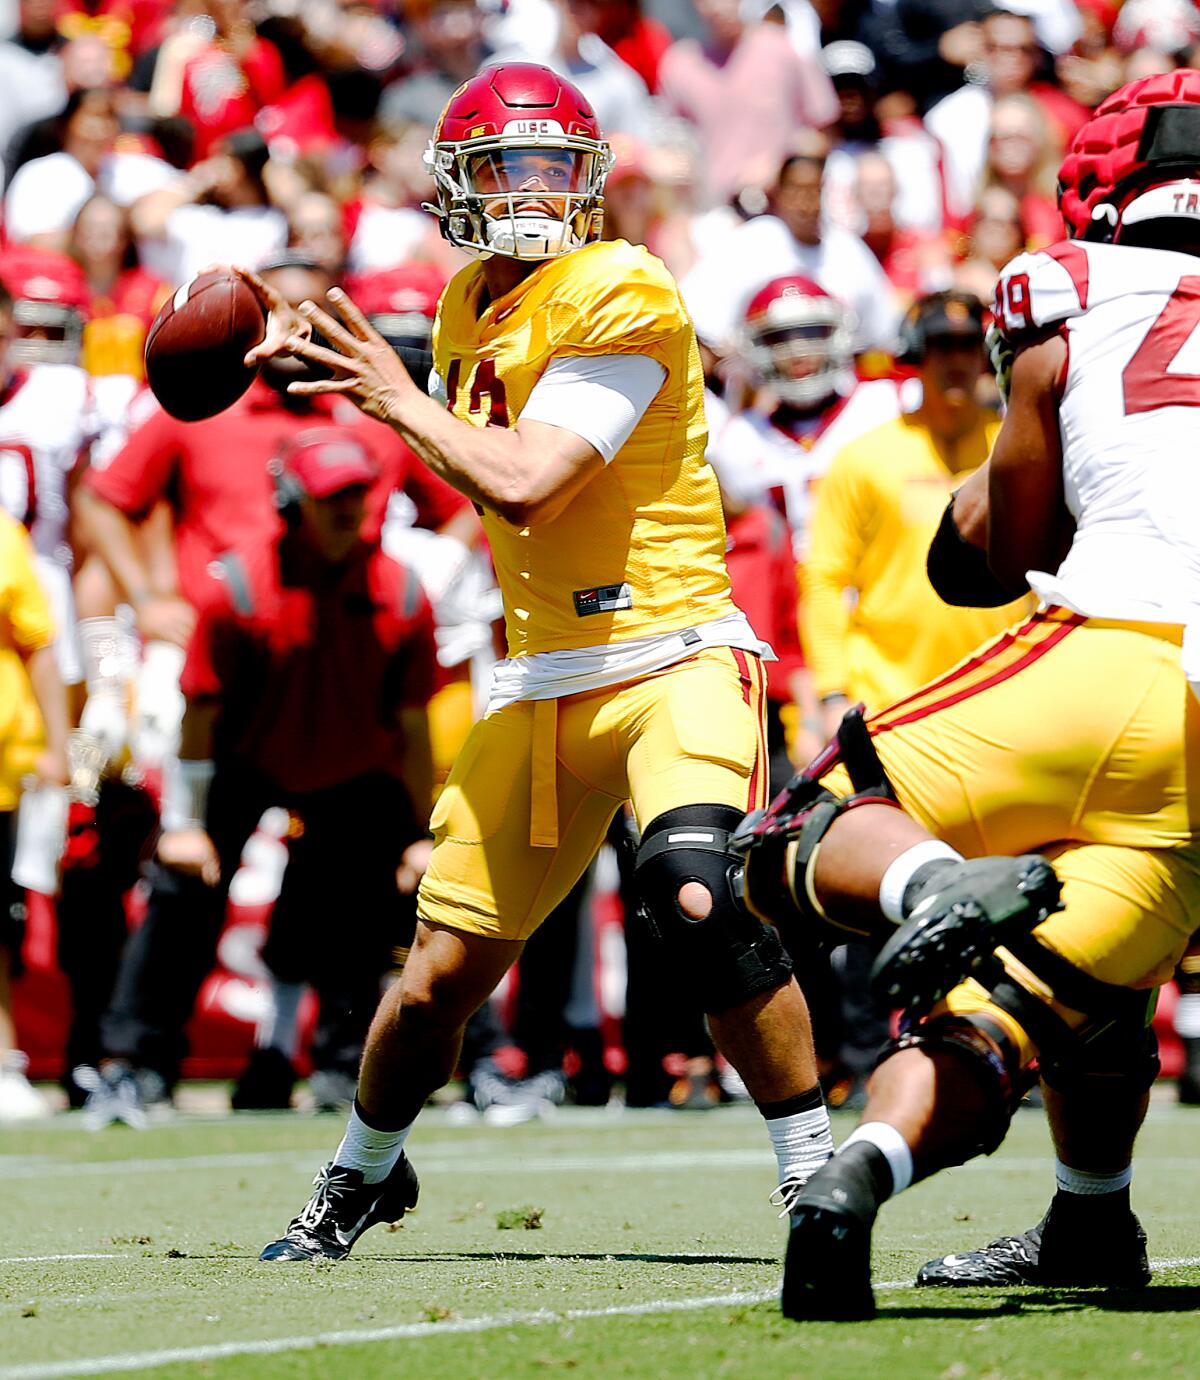 USC quarterback Caleb Williams throws a pass during the USC spring game